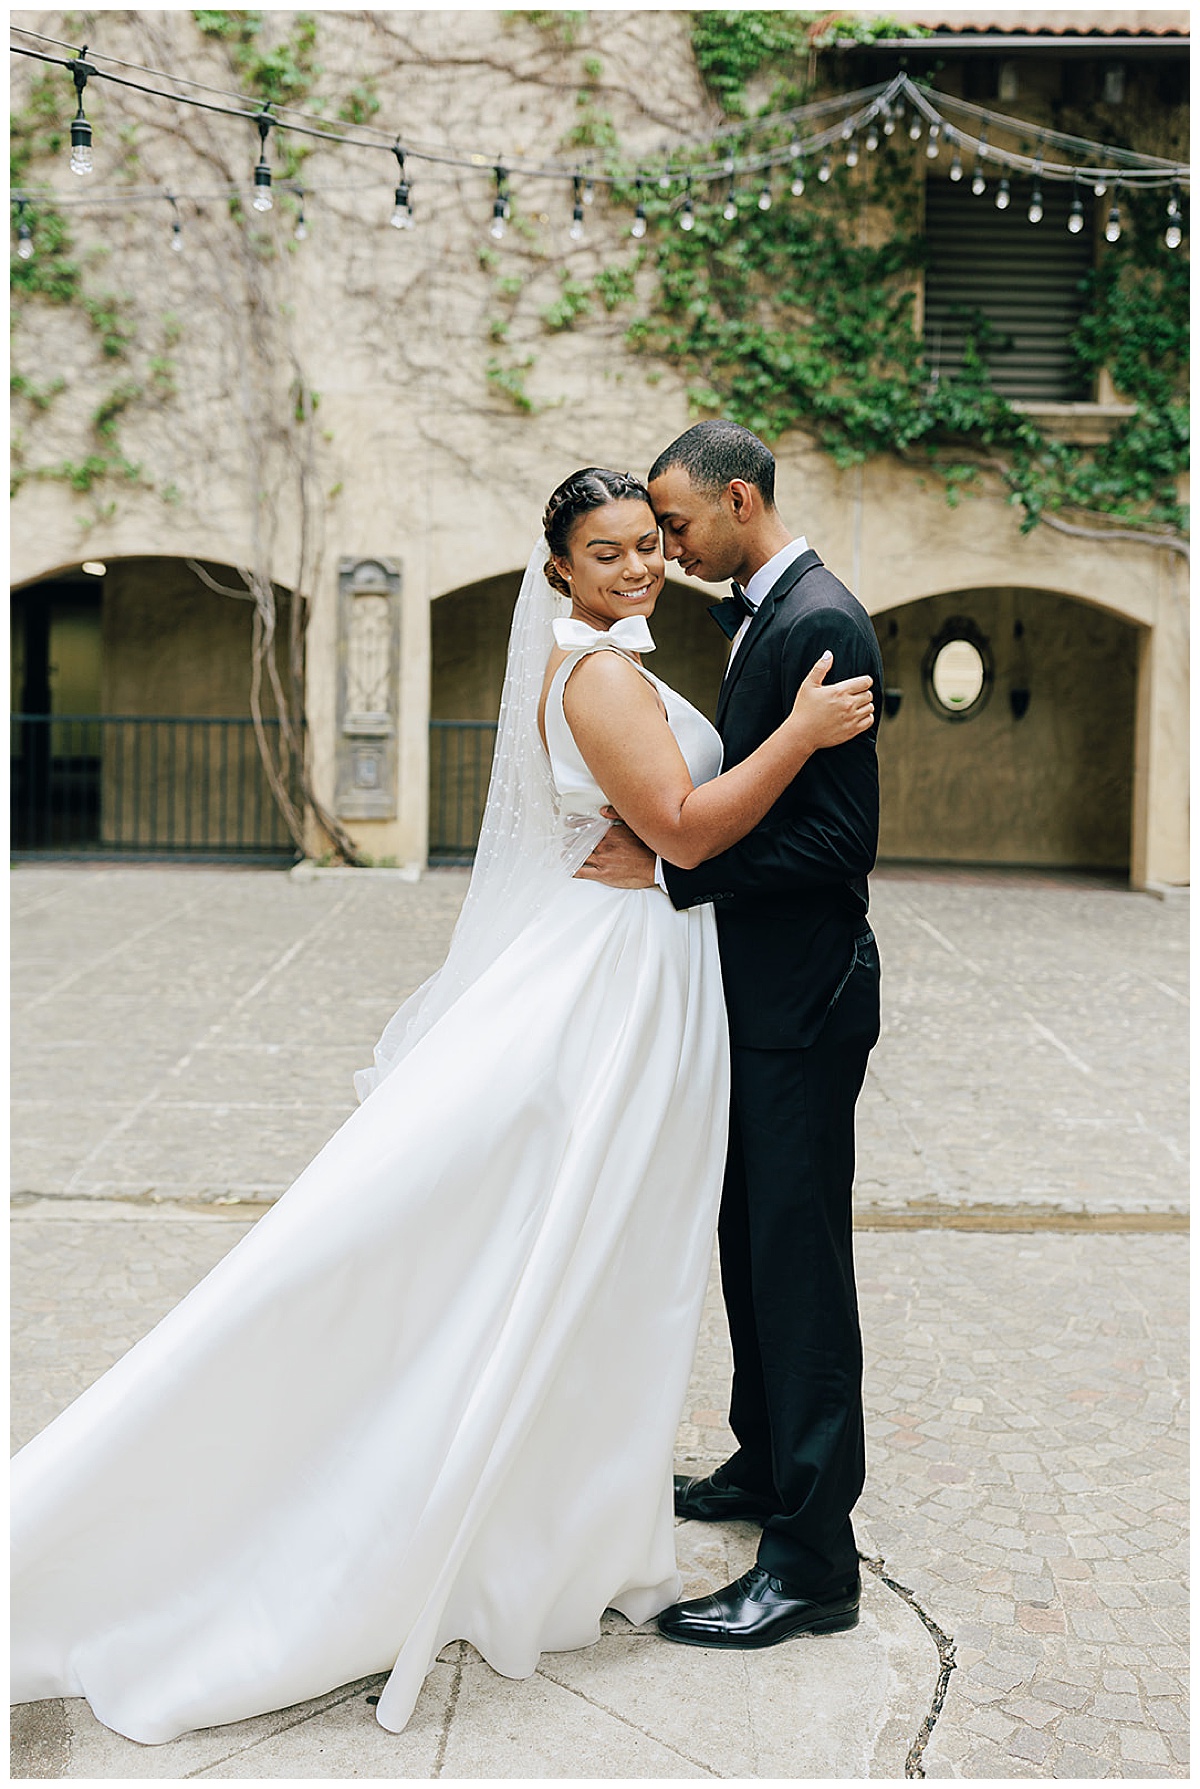 Man brings woman in close for an intimate hug for Kayla Bouren Photography